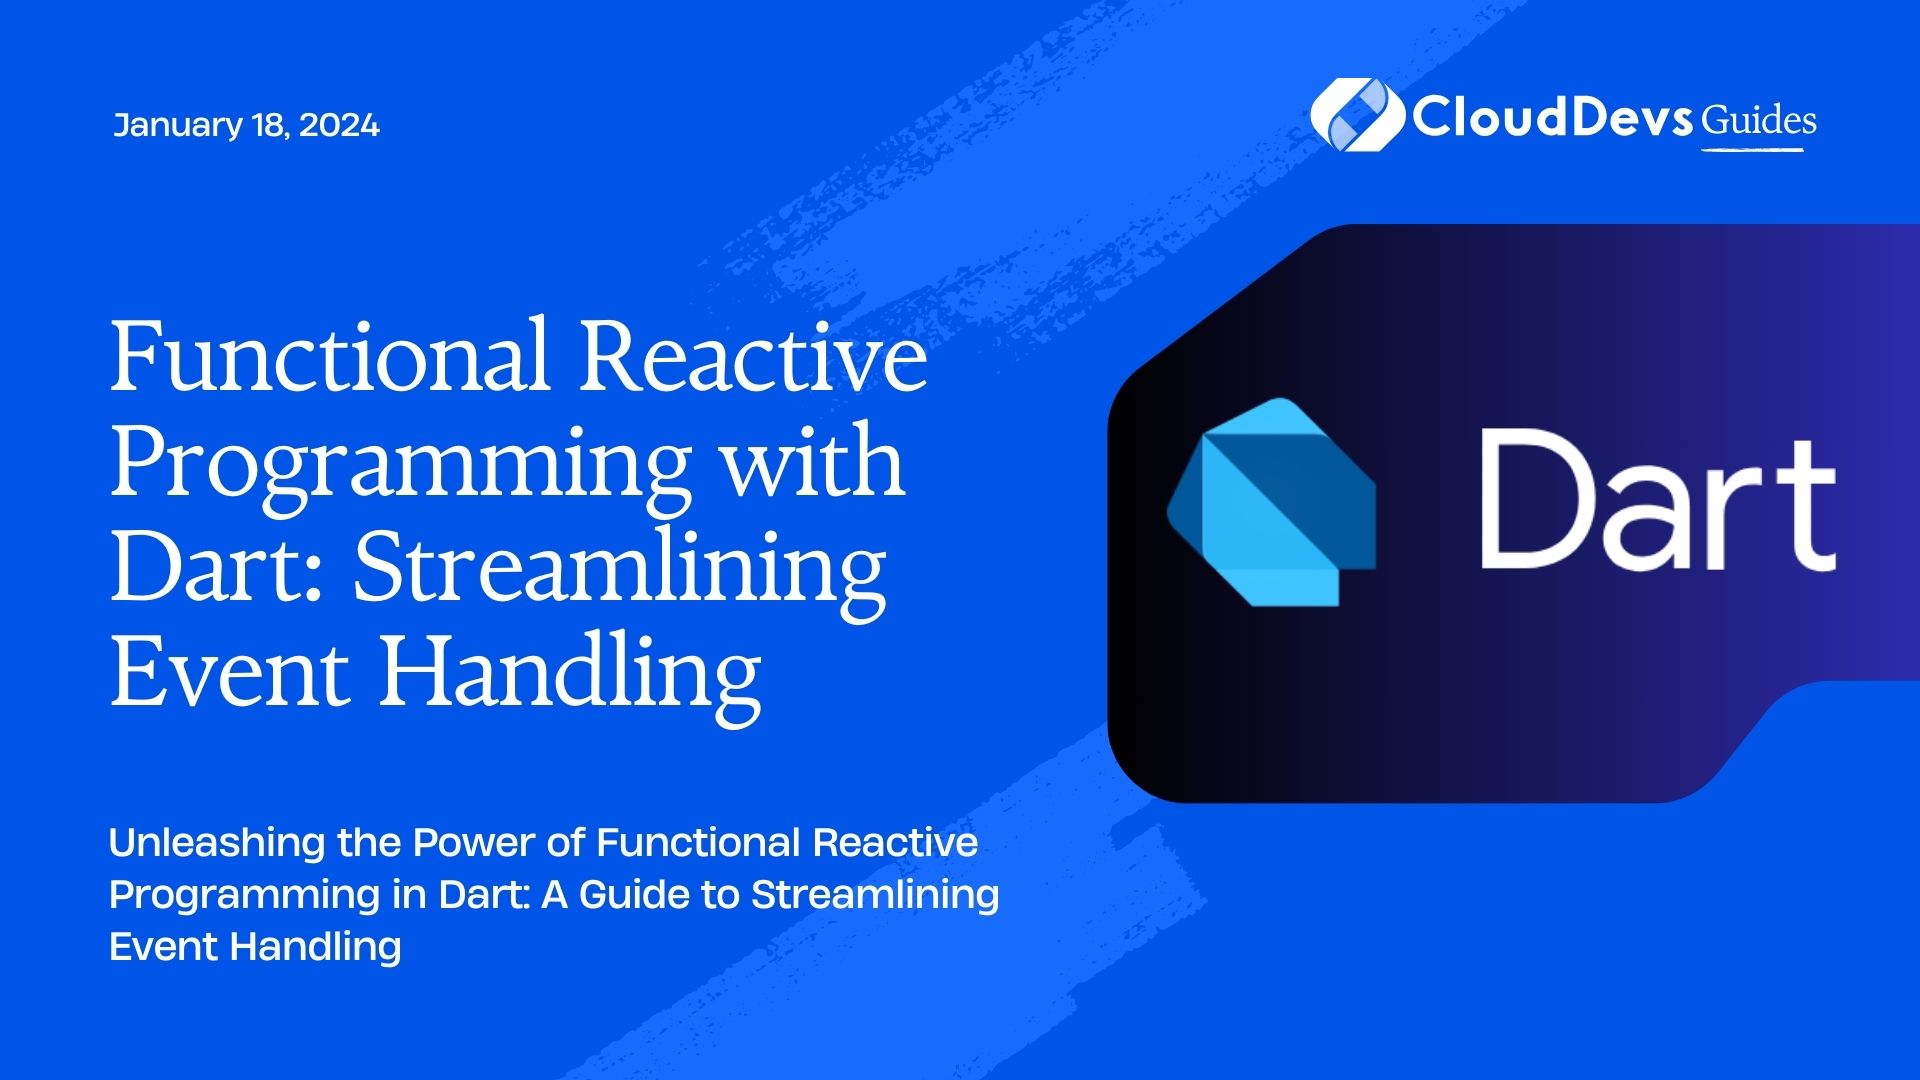 Functional Reactive Programming with Dart: Streamlining Event Handling